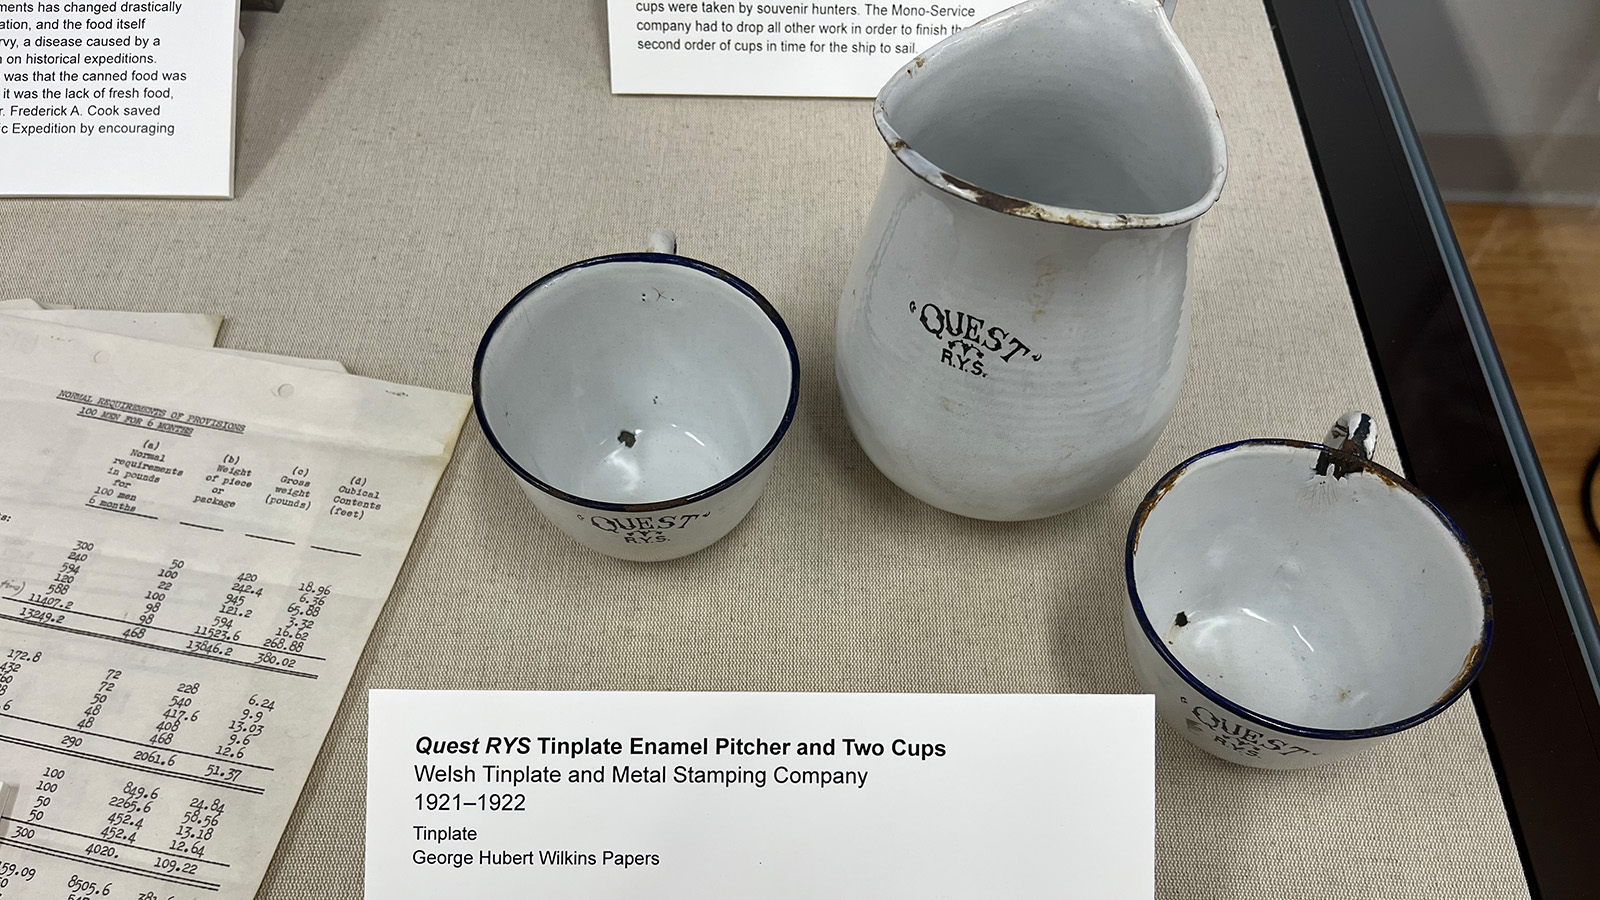 A tinplate enamel pitcher and two cups from the ship "Quest RYS."